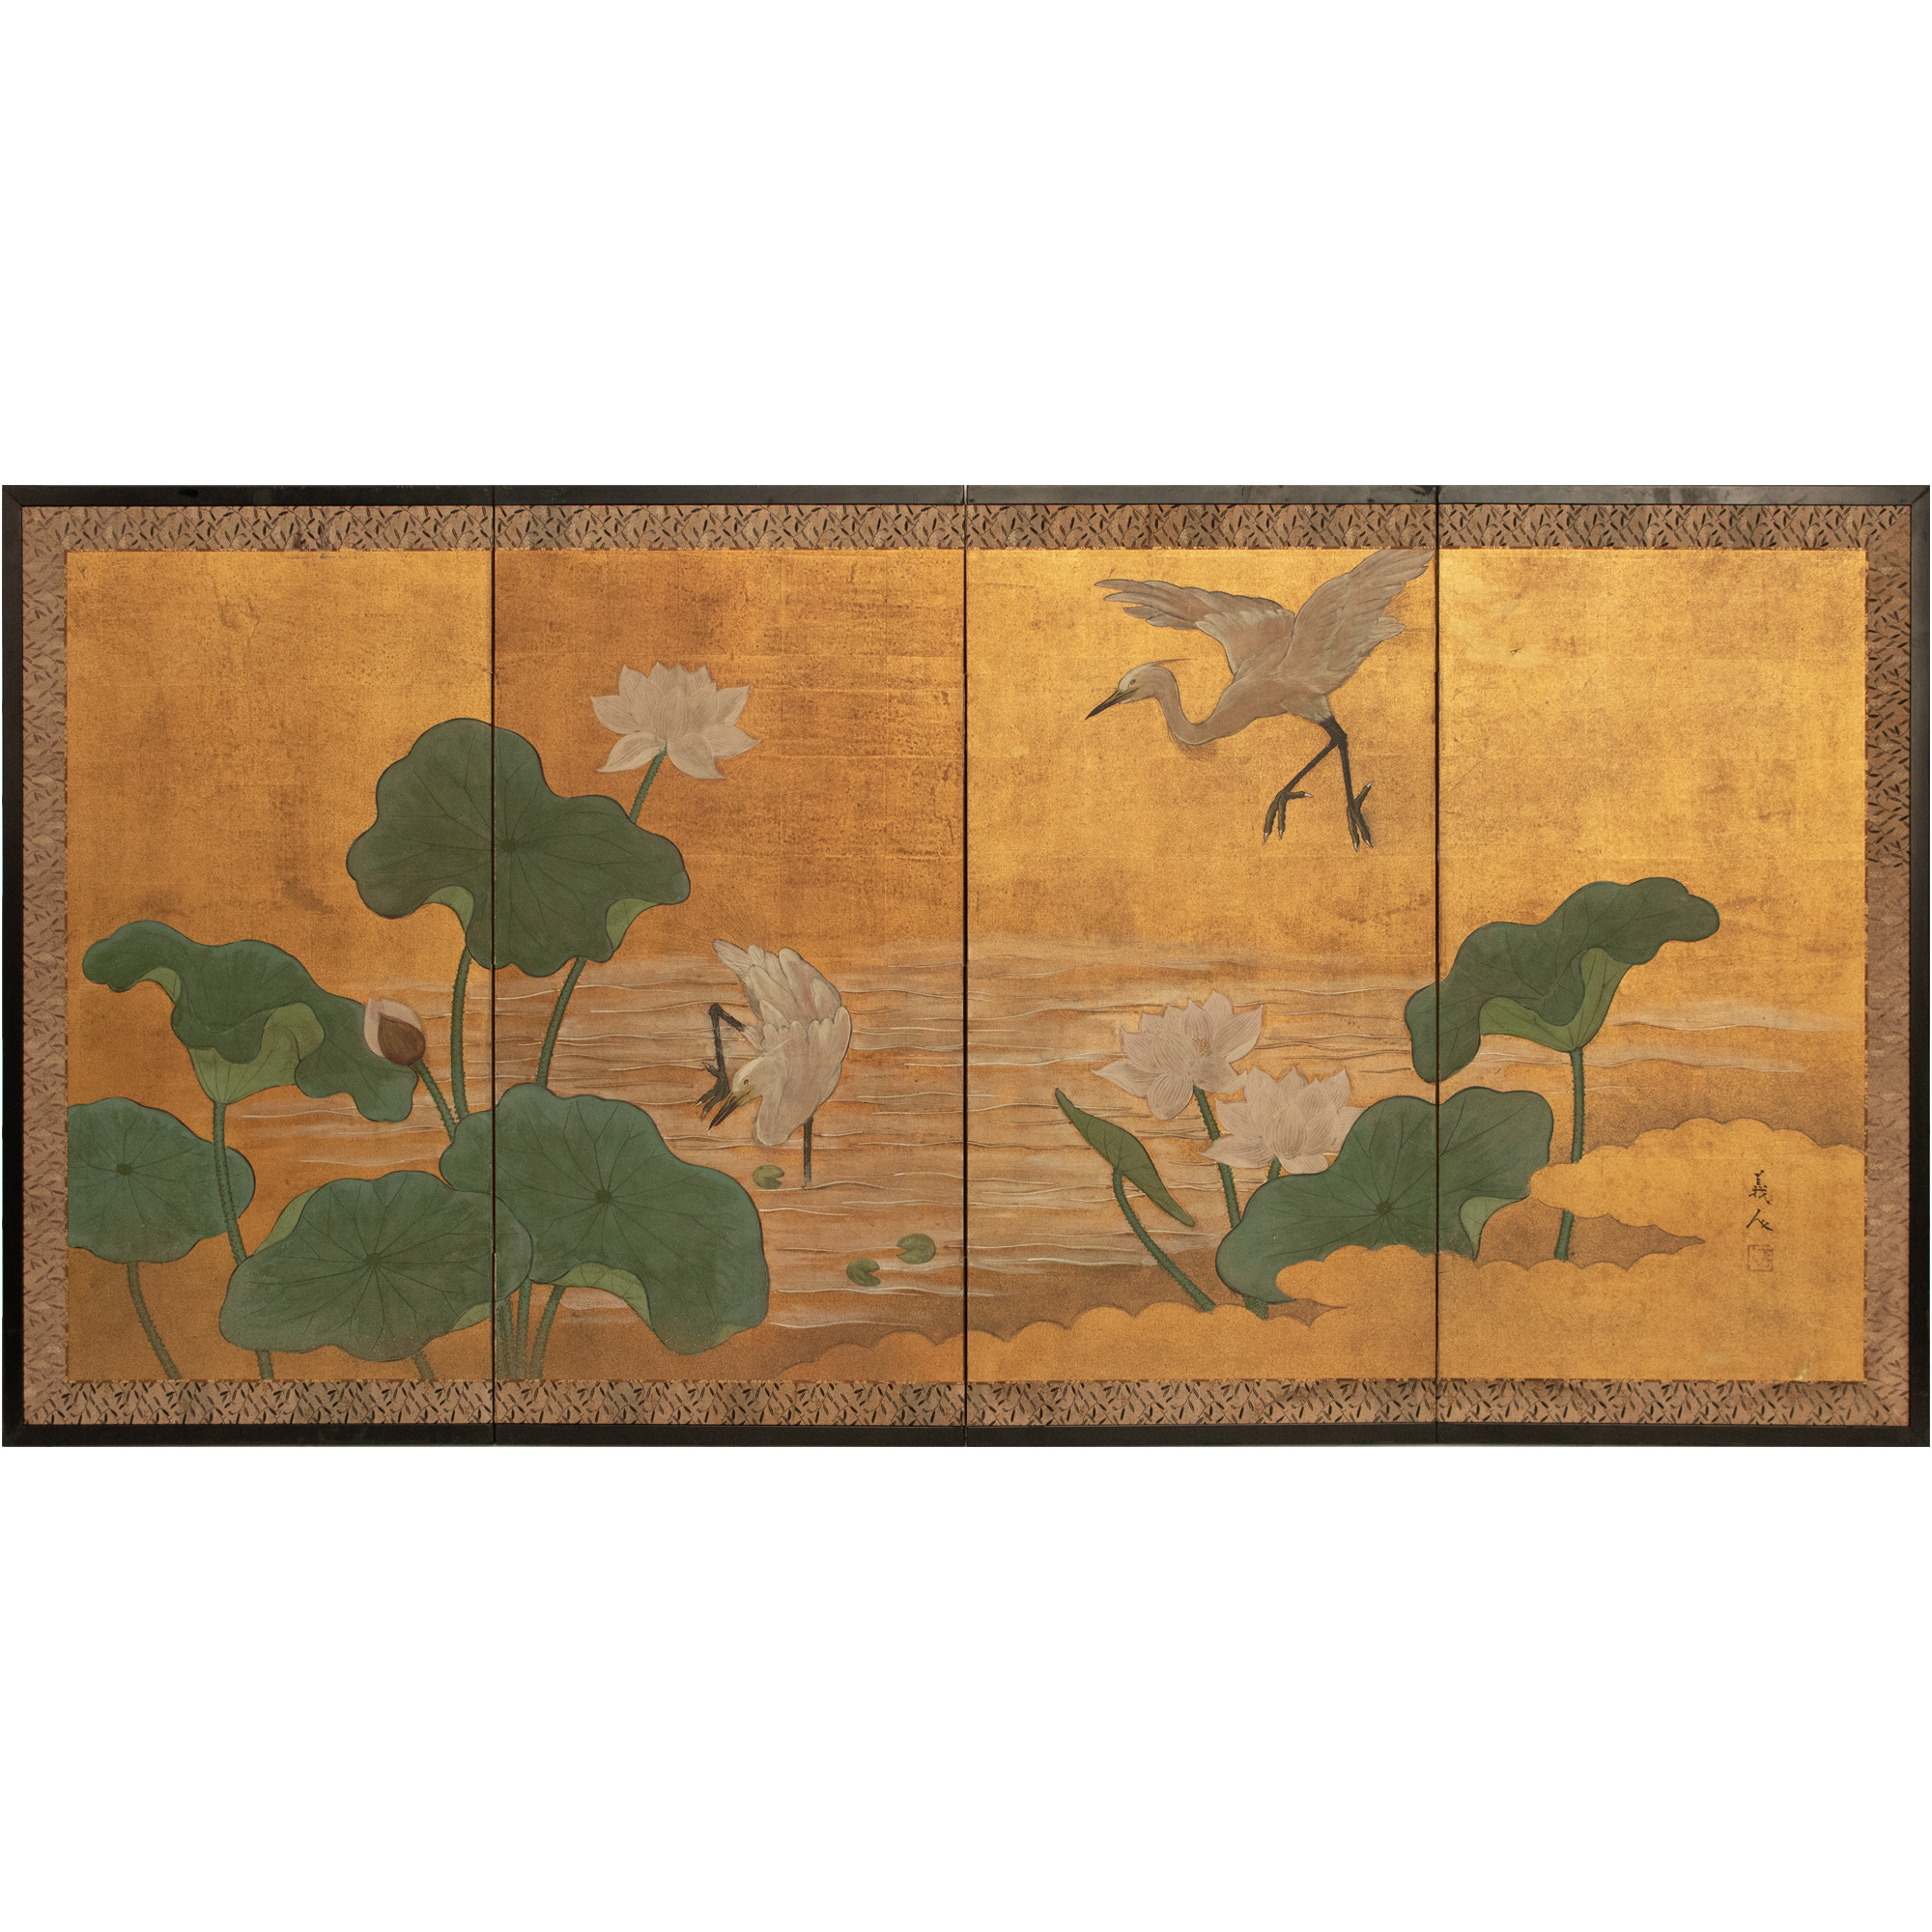 Chinoiserie Screen With Egrets and Lotus~P77680960